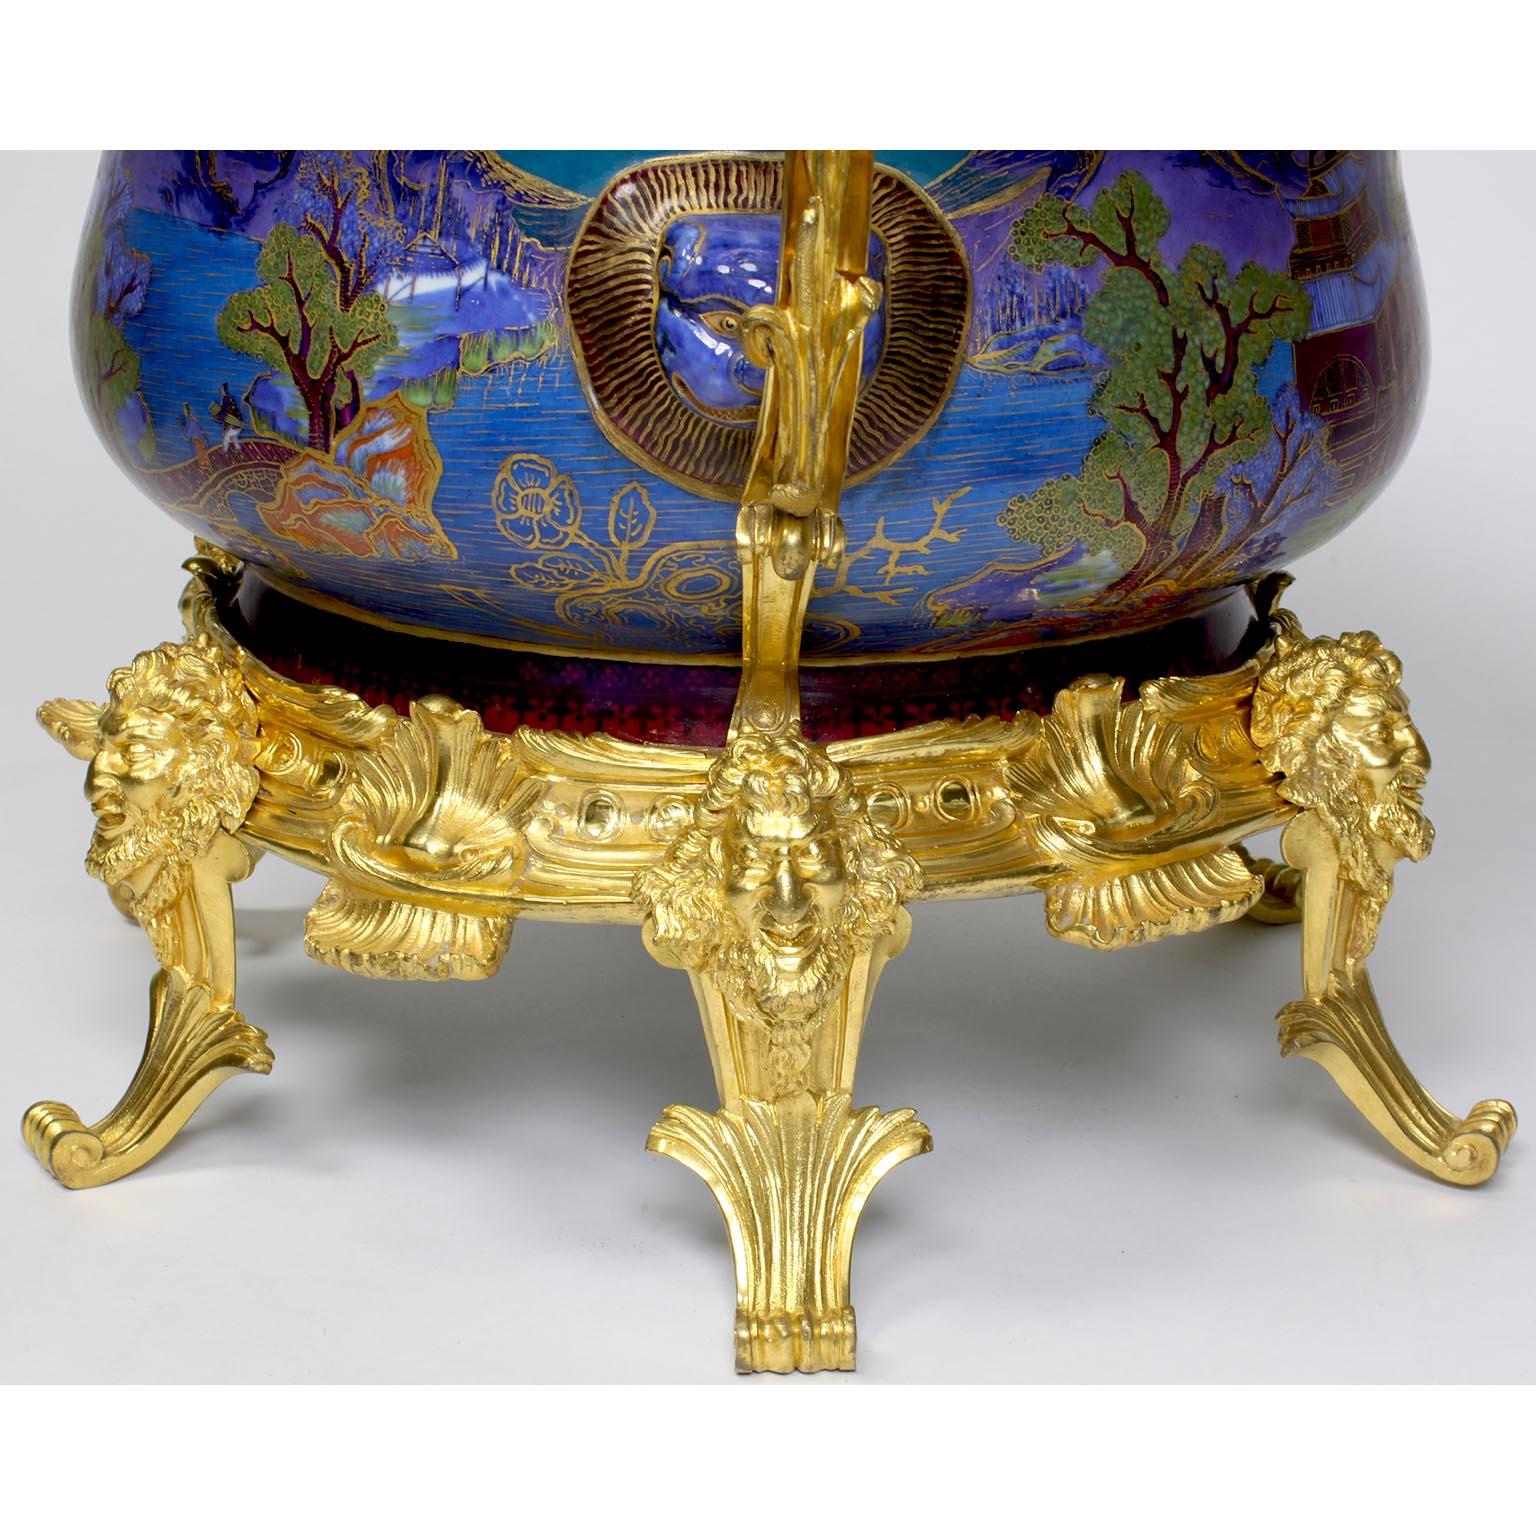 Chinese Export Famille Verte Porcelain & French Ormolu Chinoiserie Centerpiece For Sale 9